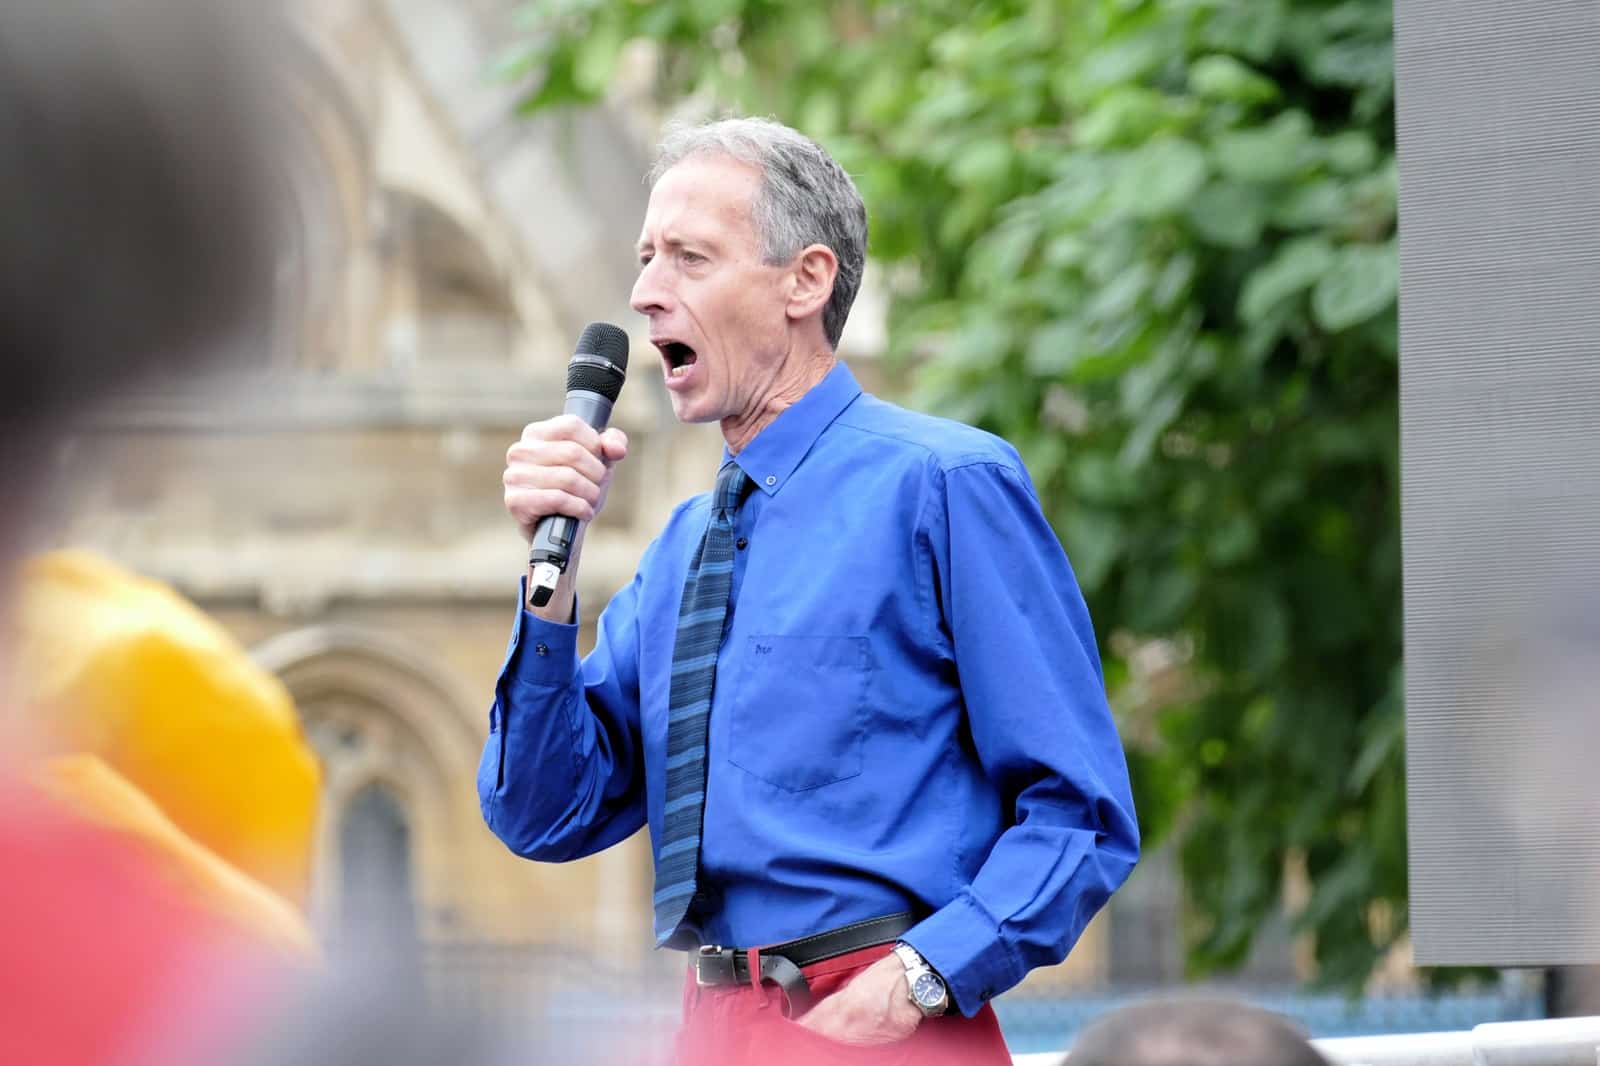 Image Credit: Shutterstock / Brian Minkoff <p><span>Notably, human rights campaigners have also joined the chorus of criticism. Peter Tatchell, a stalwart defender of LGBTQ+ rights, stated, “The Tories seem to be suggesting that groups undermining ‘British values’ should be declared extremist and subject to new restrictions. But what are British values?”</span></p>